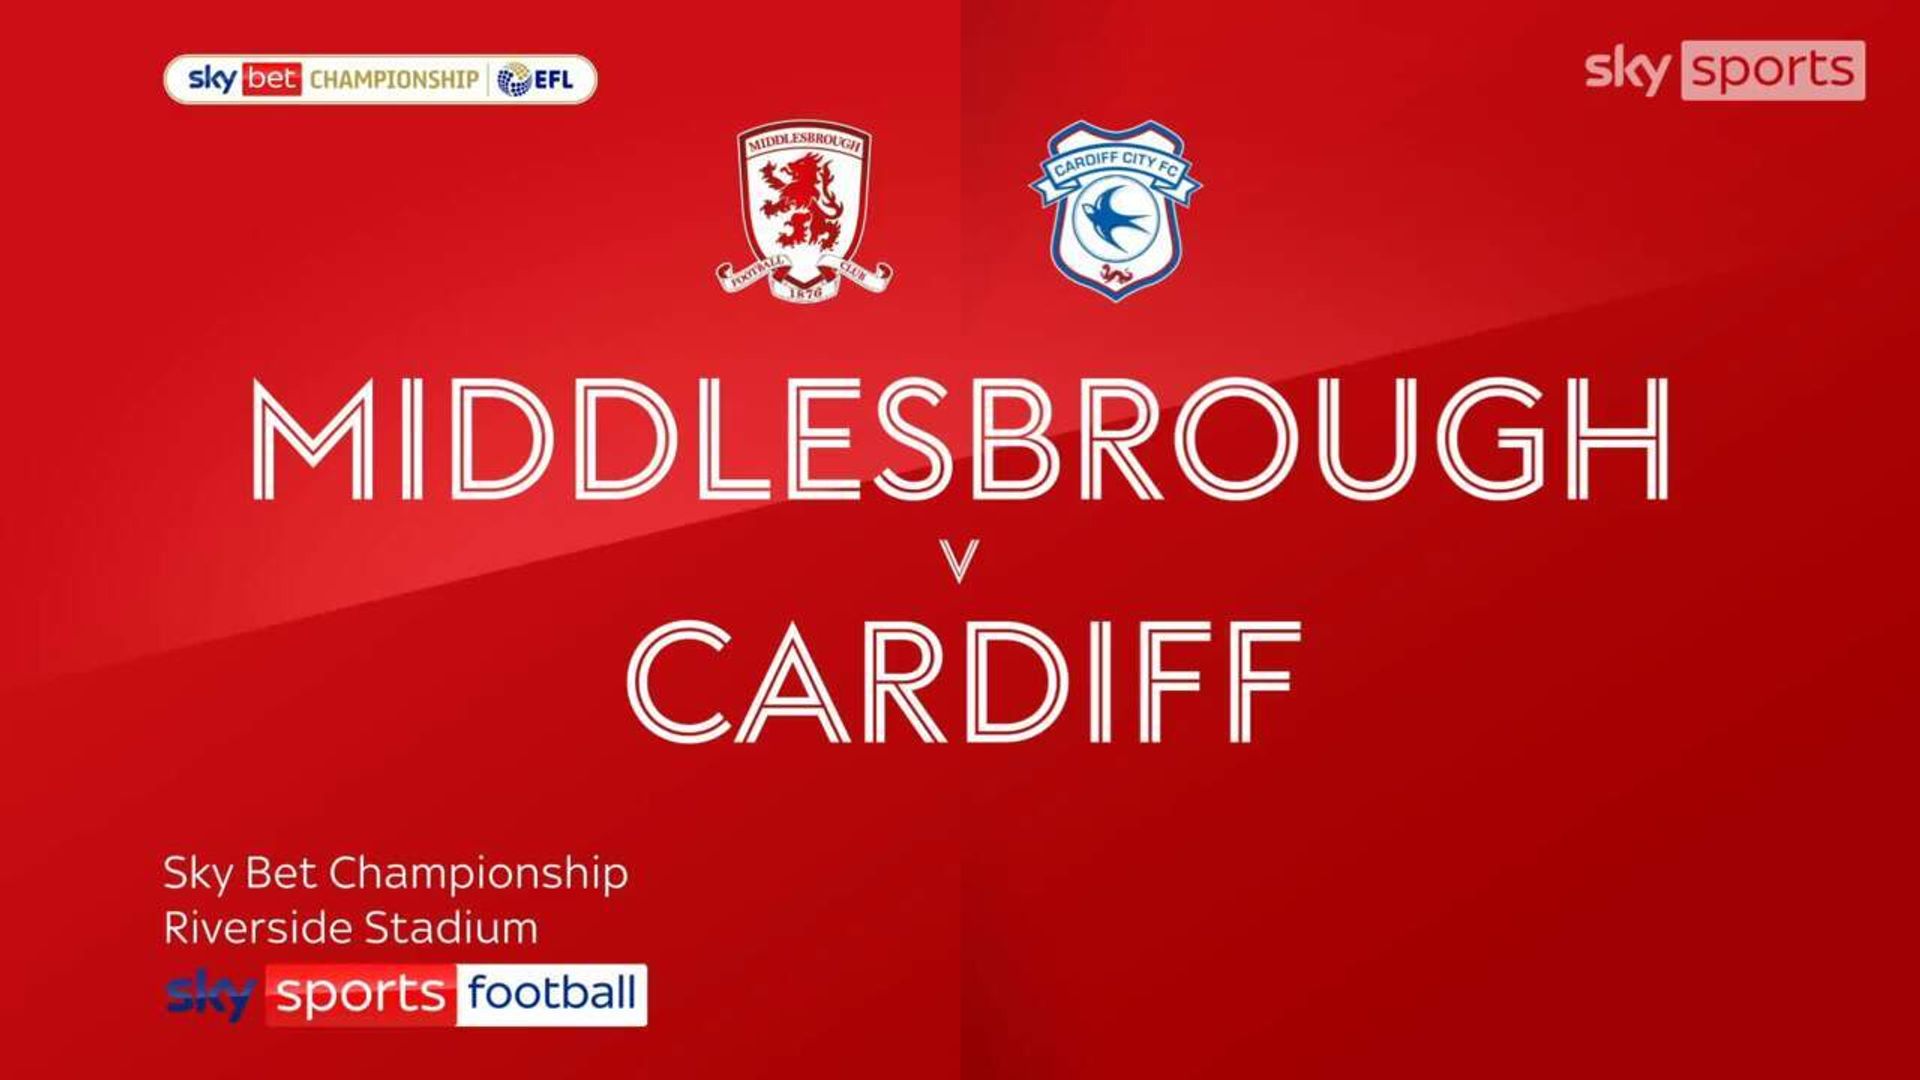 Middlesbrough 2-0 Cardiff